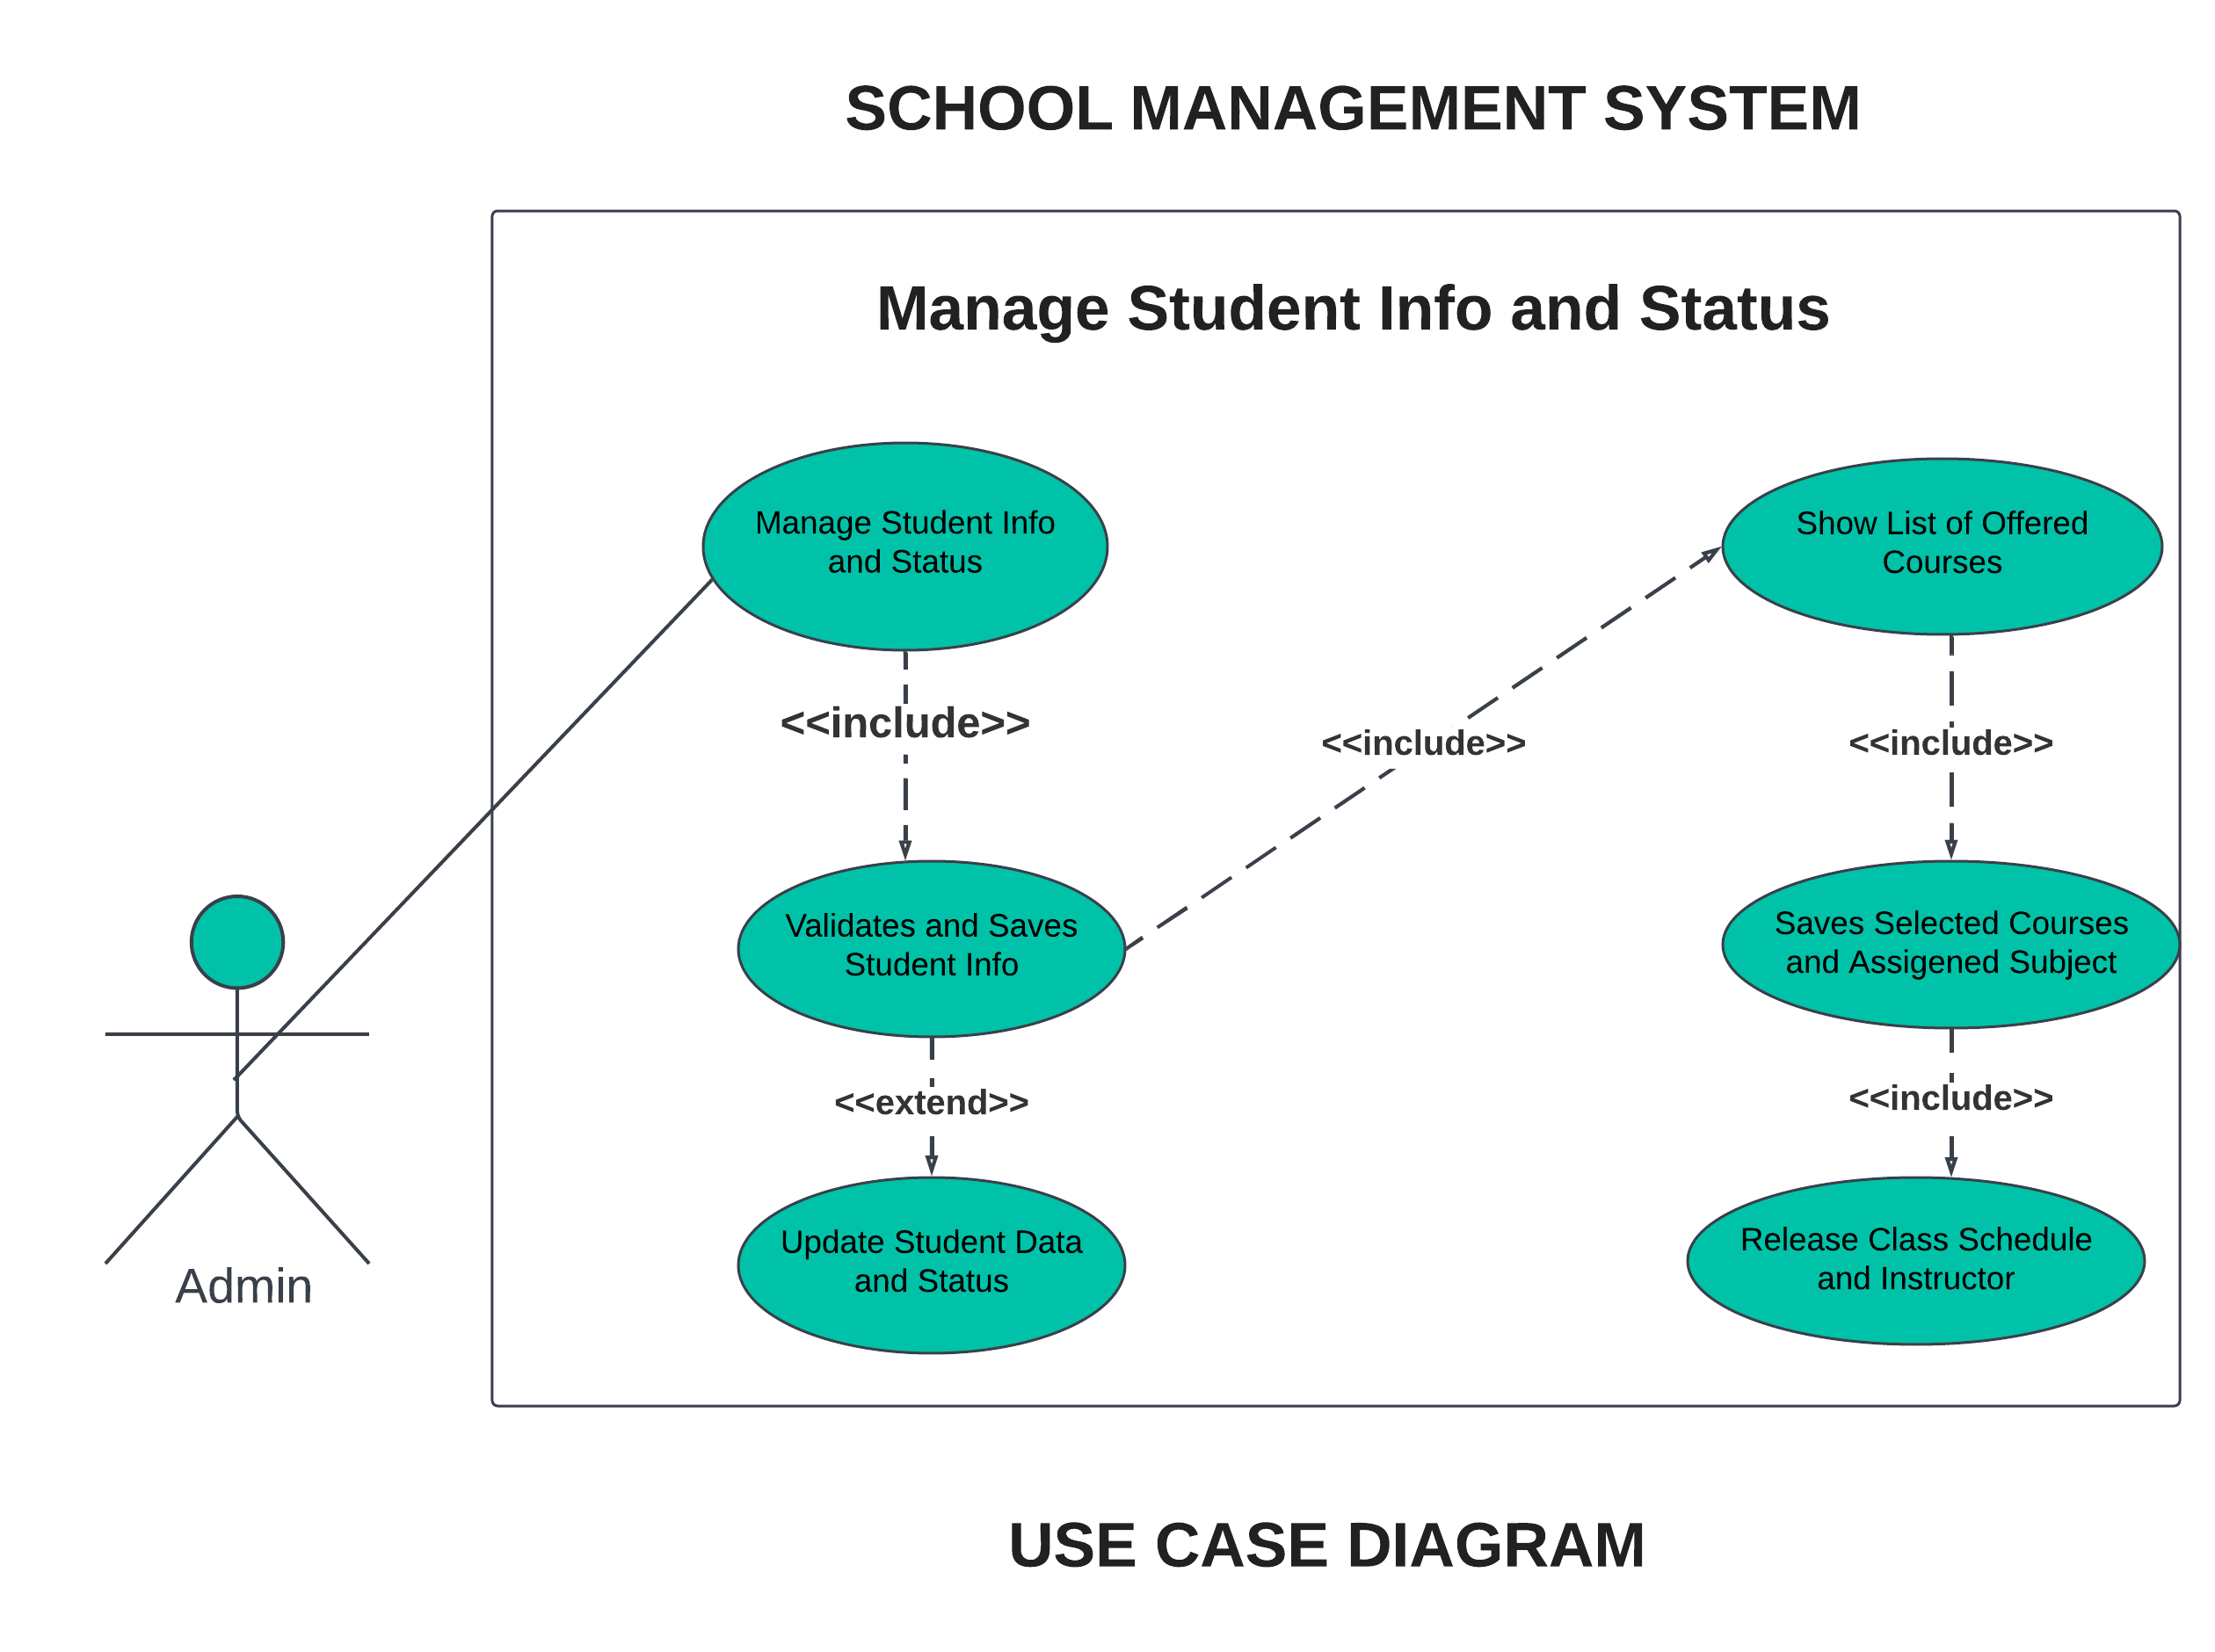 MANAGE STUDENTS INFO AND STATUS USE CASE DIAGRAM